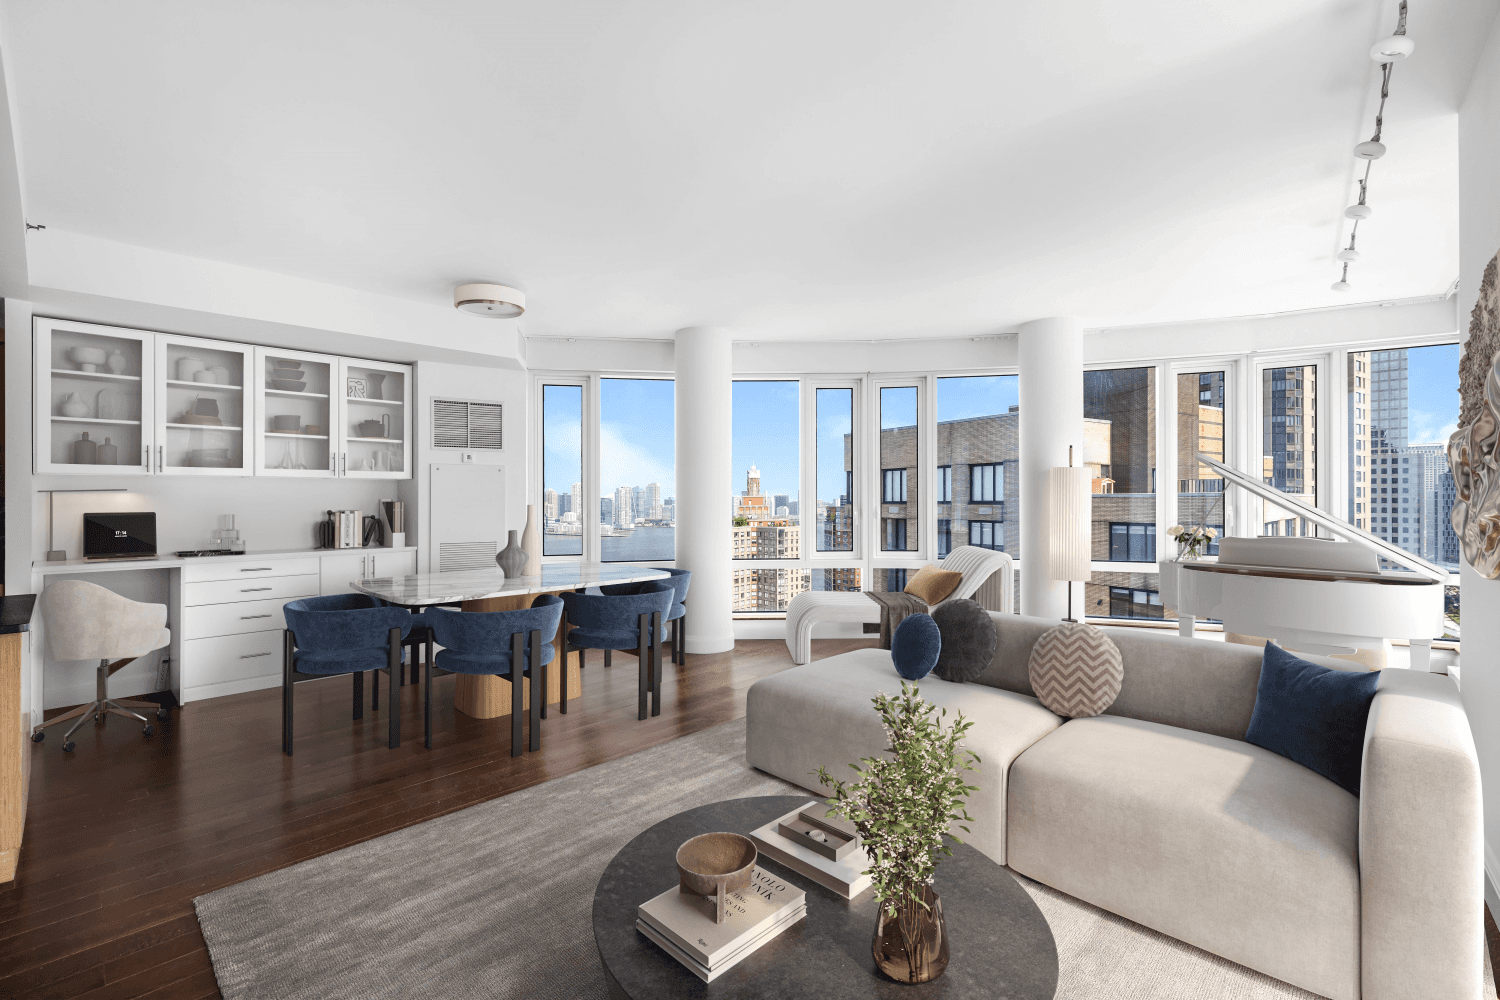 Dramatic sunsets over the Hudson River await in this sprawling 3 bedroom, 2 bathroom condo at the LEED Platinum certified Visionaire with energy efficient technology and air and water filtration ...